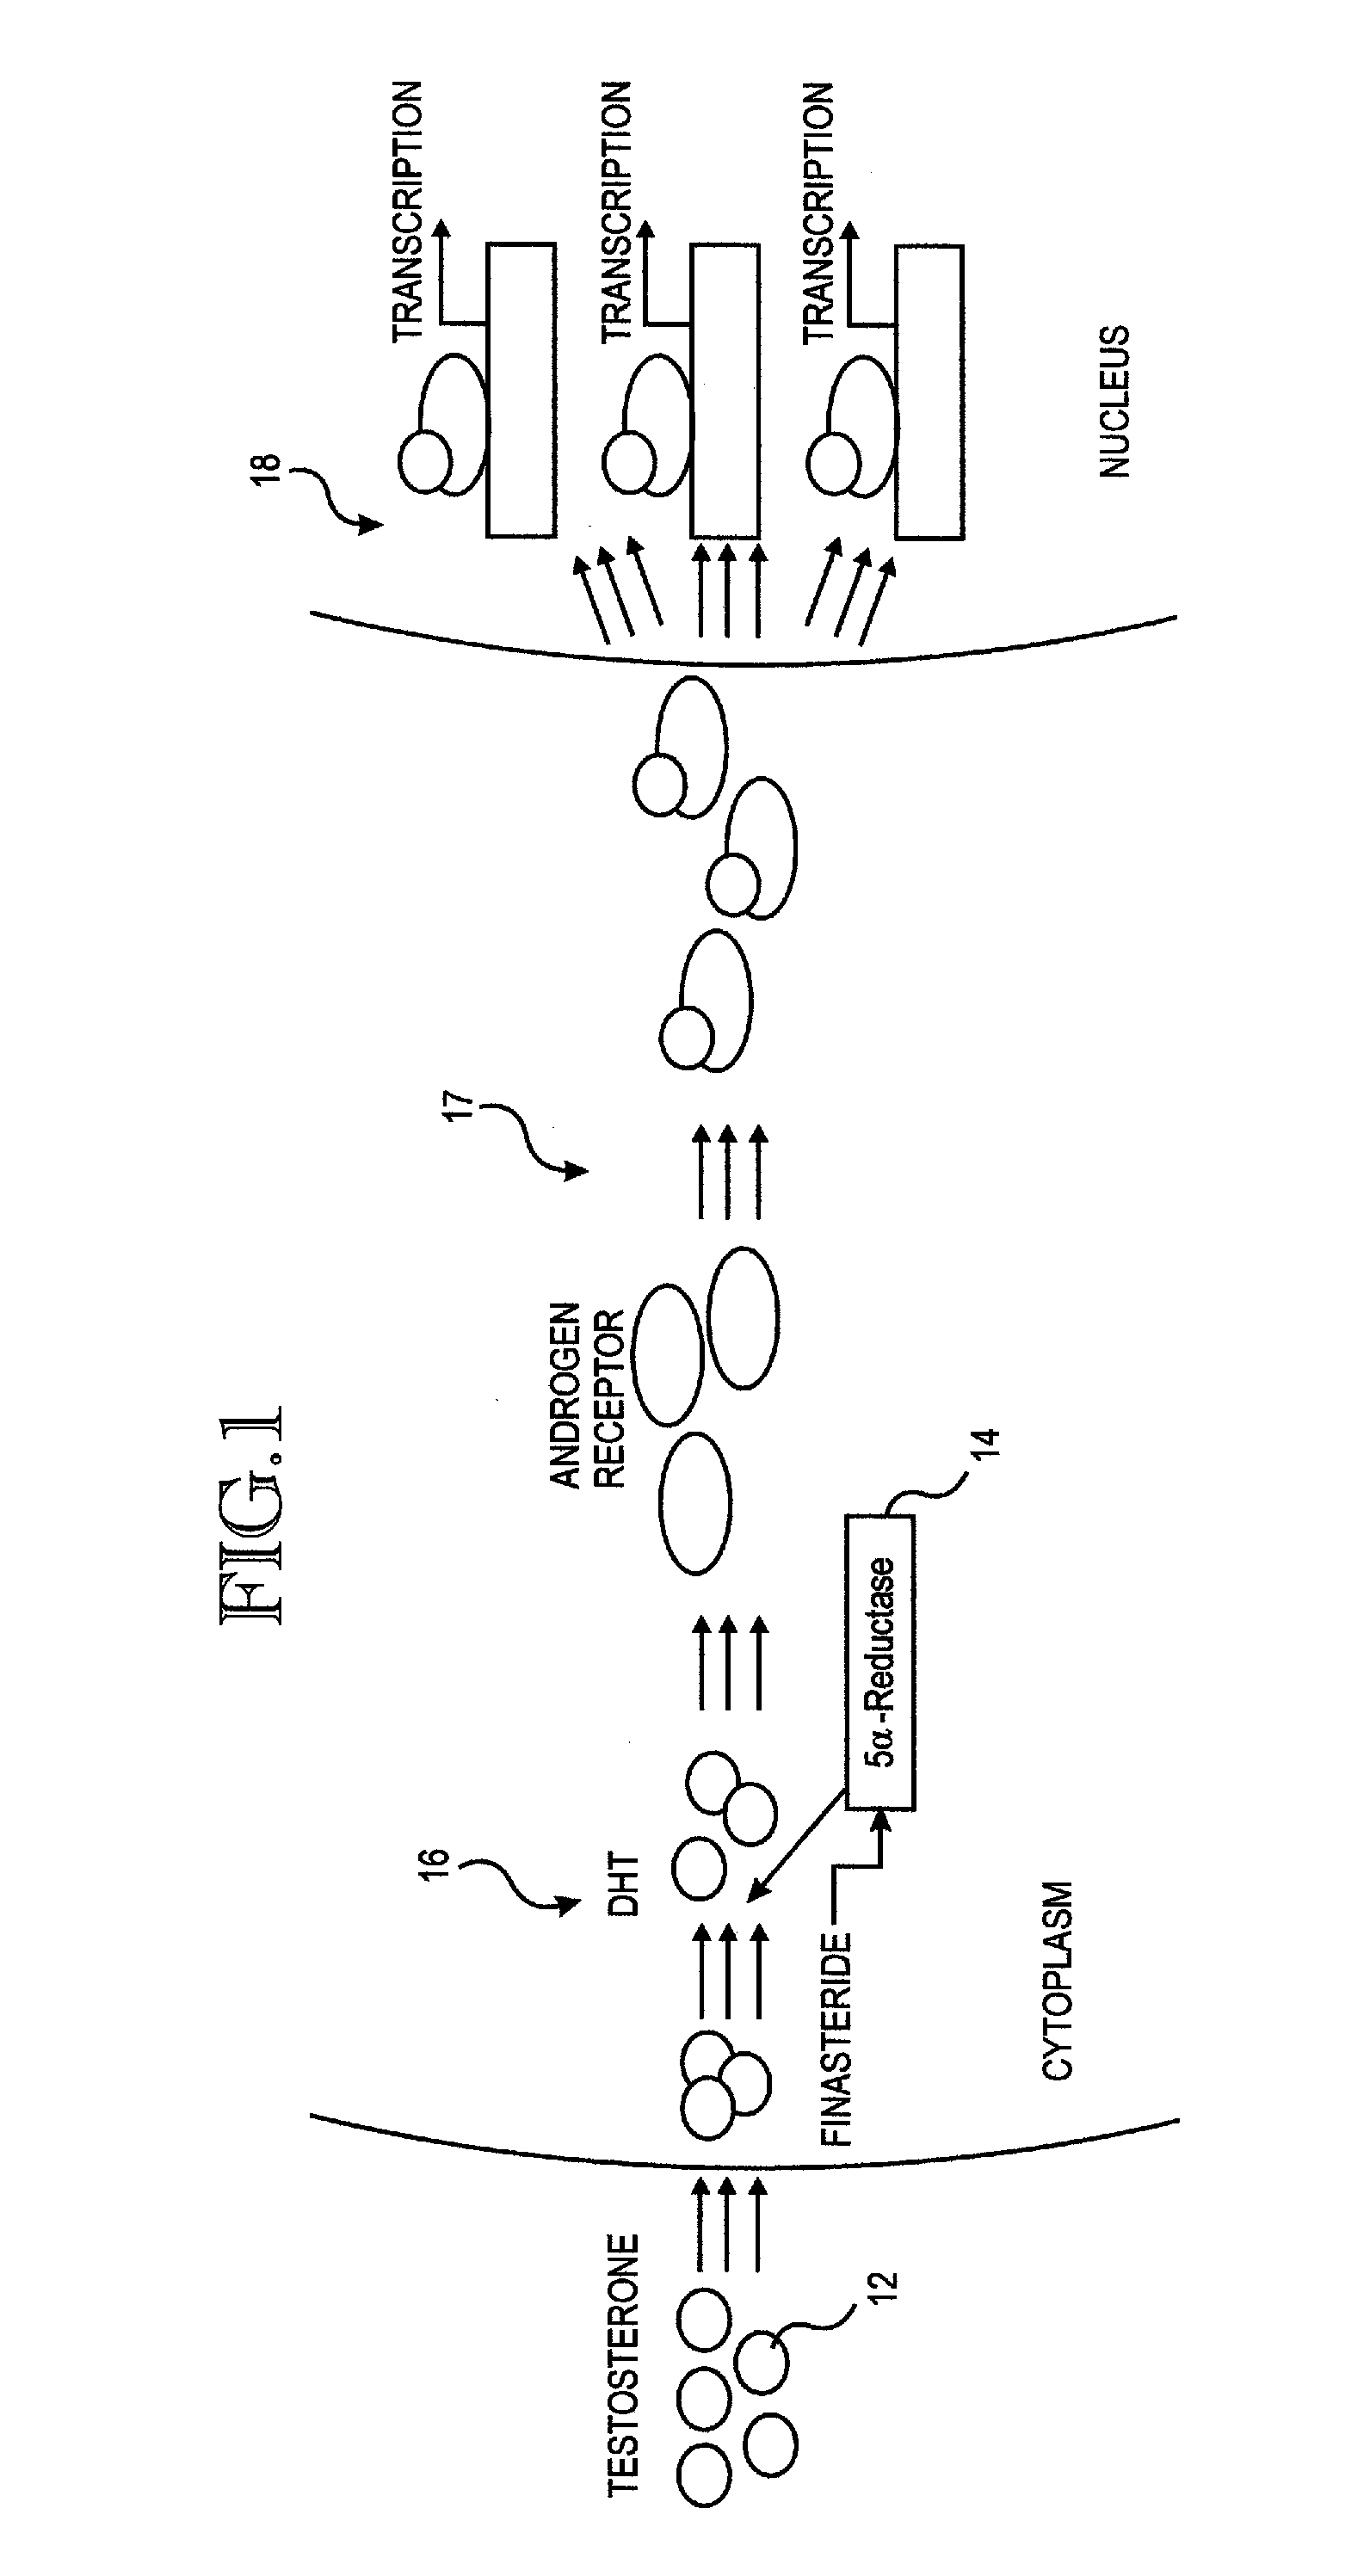 Method and kit for treatment/prevention of hair loss